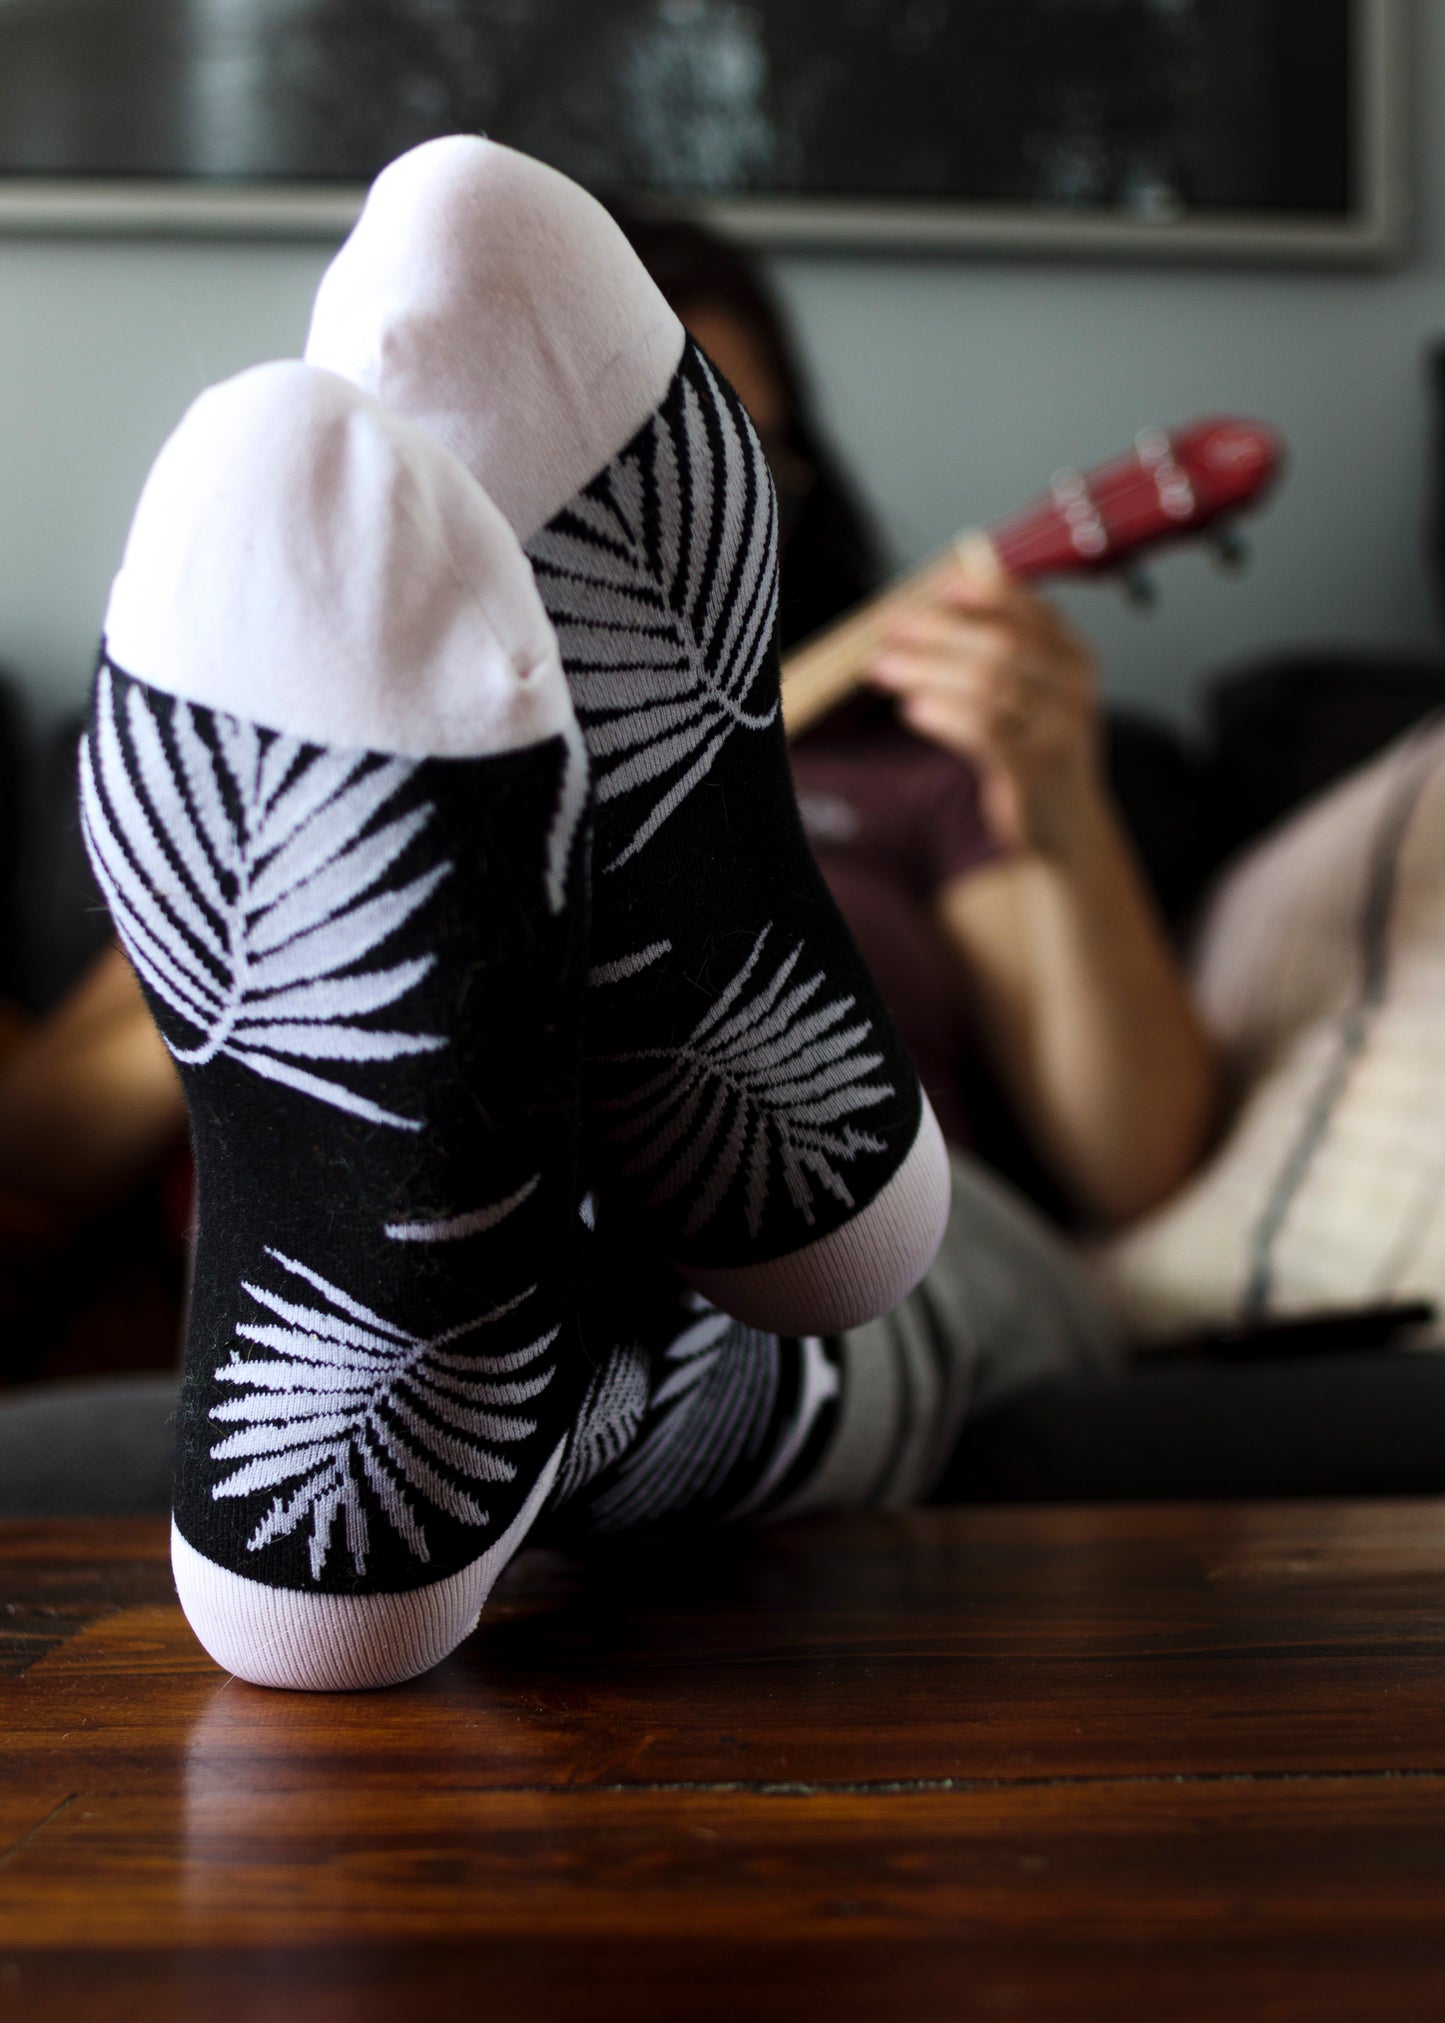 Step up your sock game with Rebel Fashion's Funky White Leaf Socks!